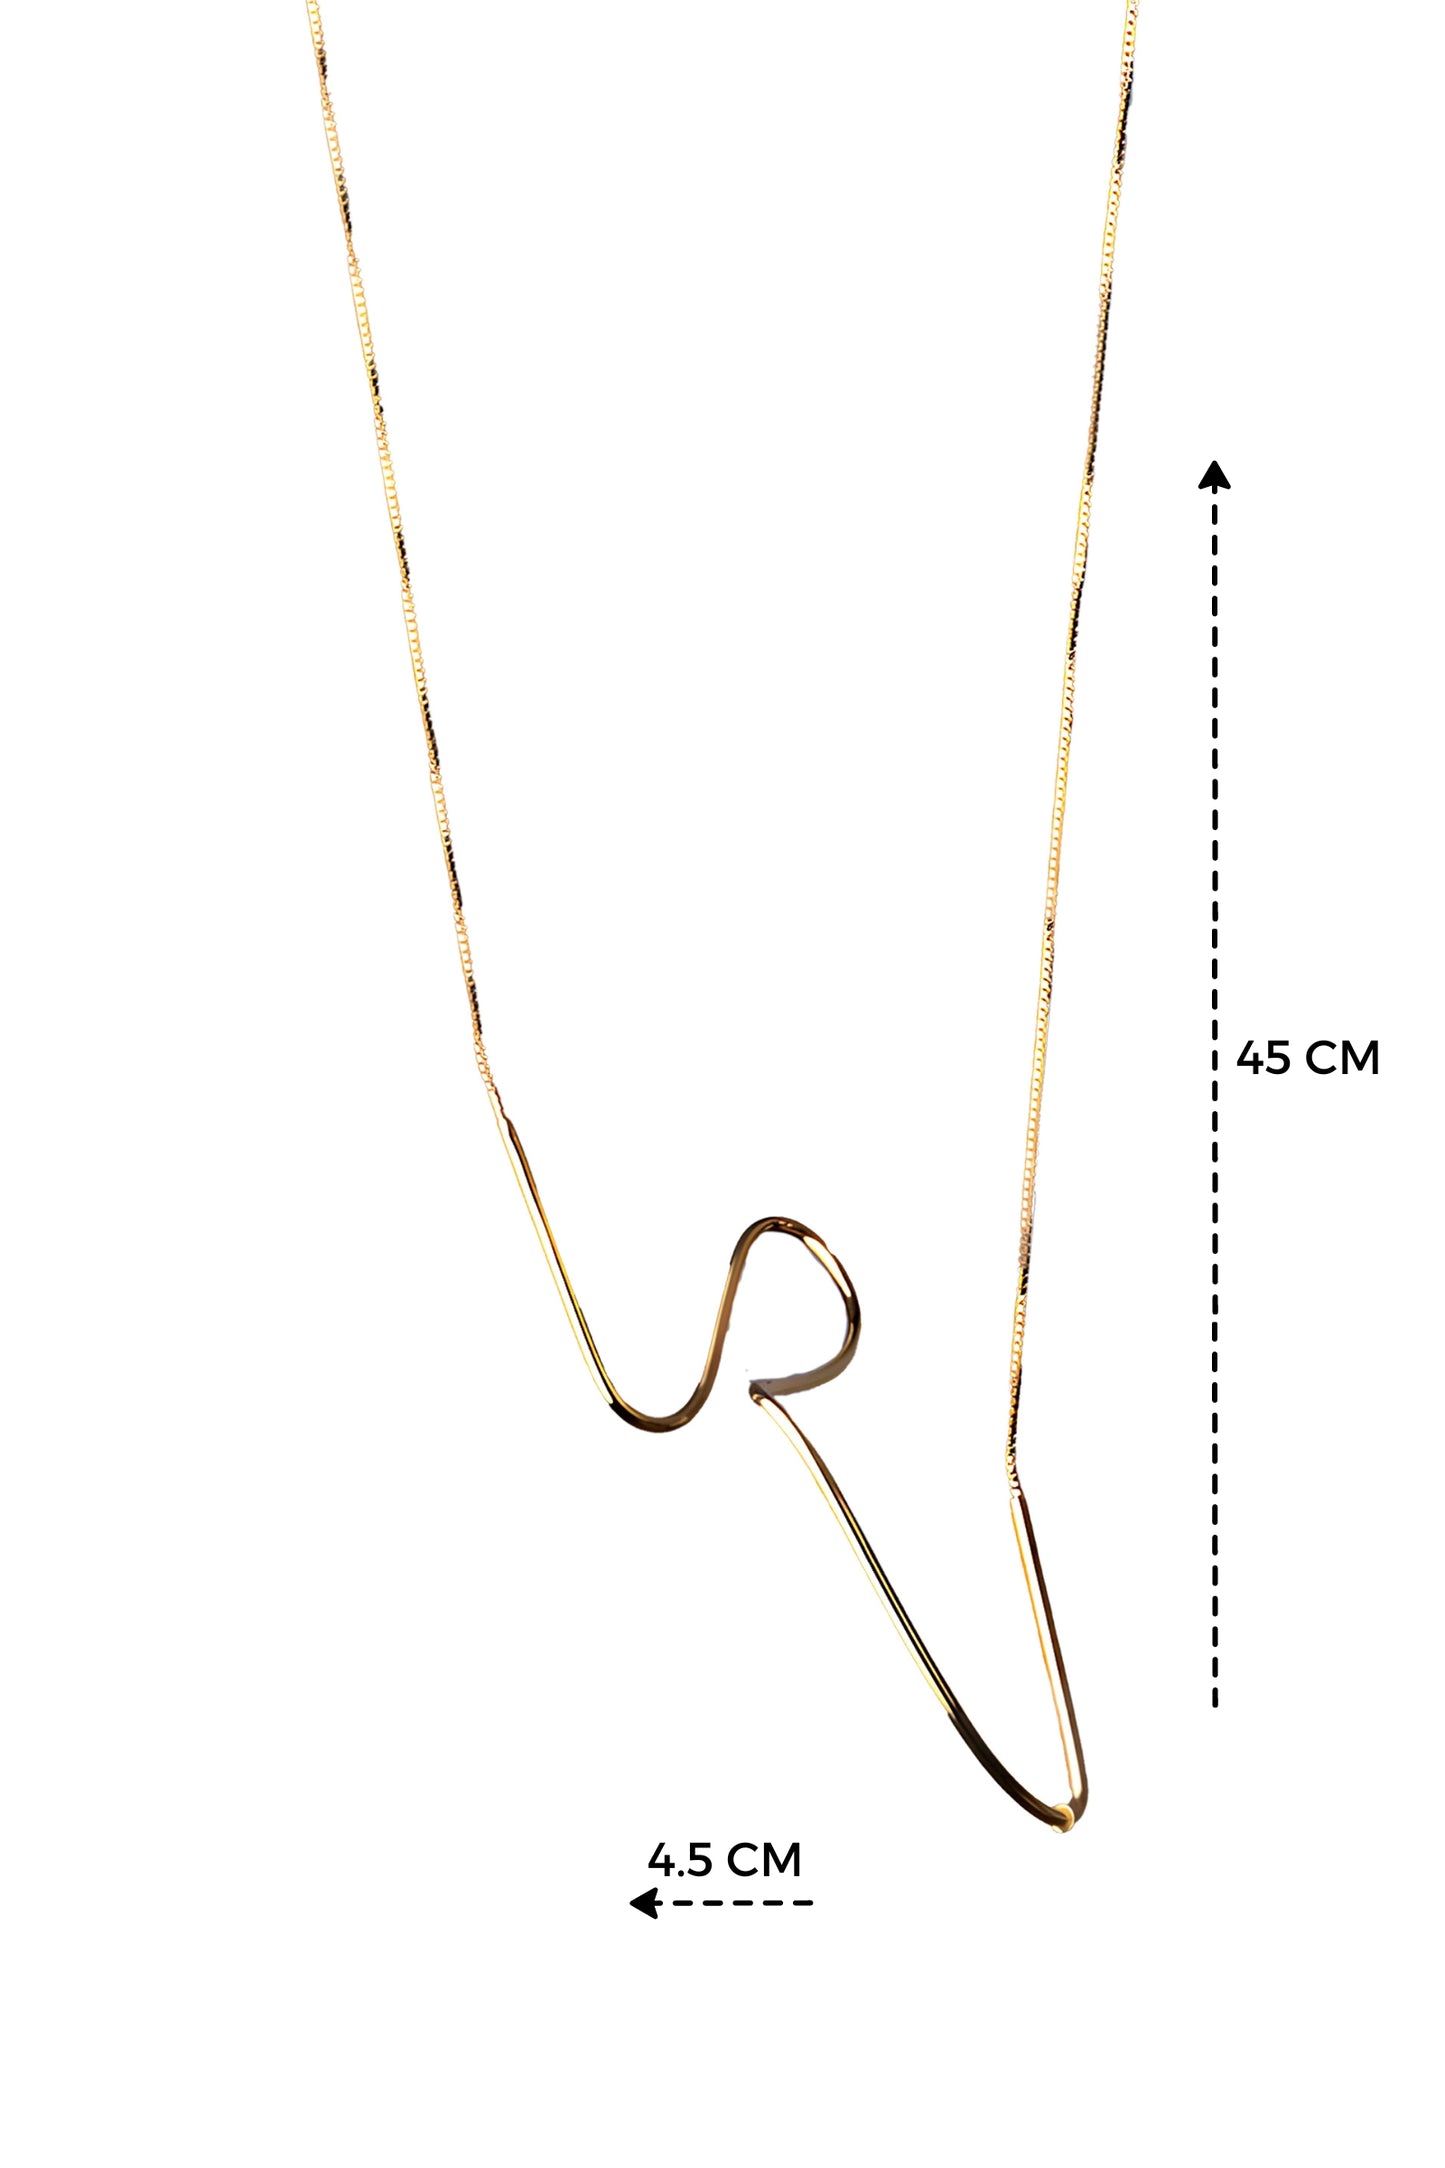 a diagram of a necklace with measurements